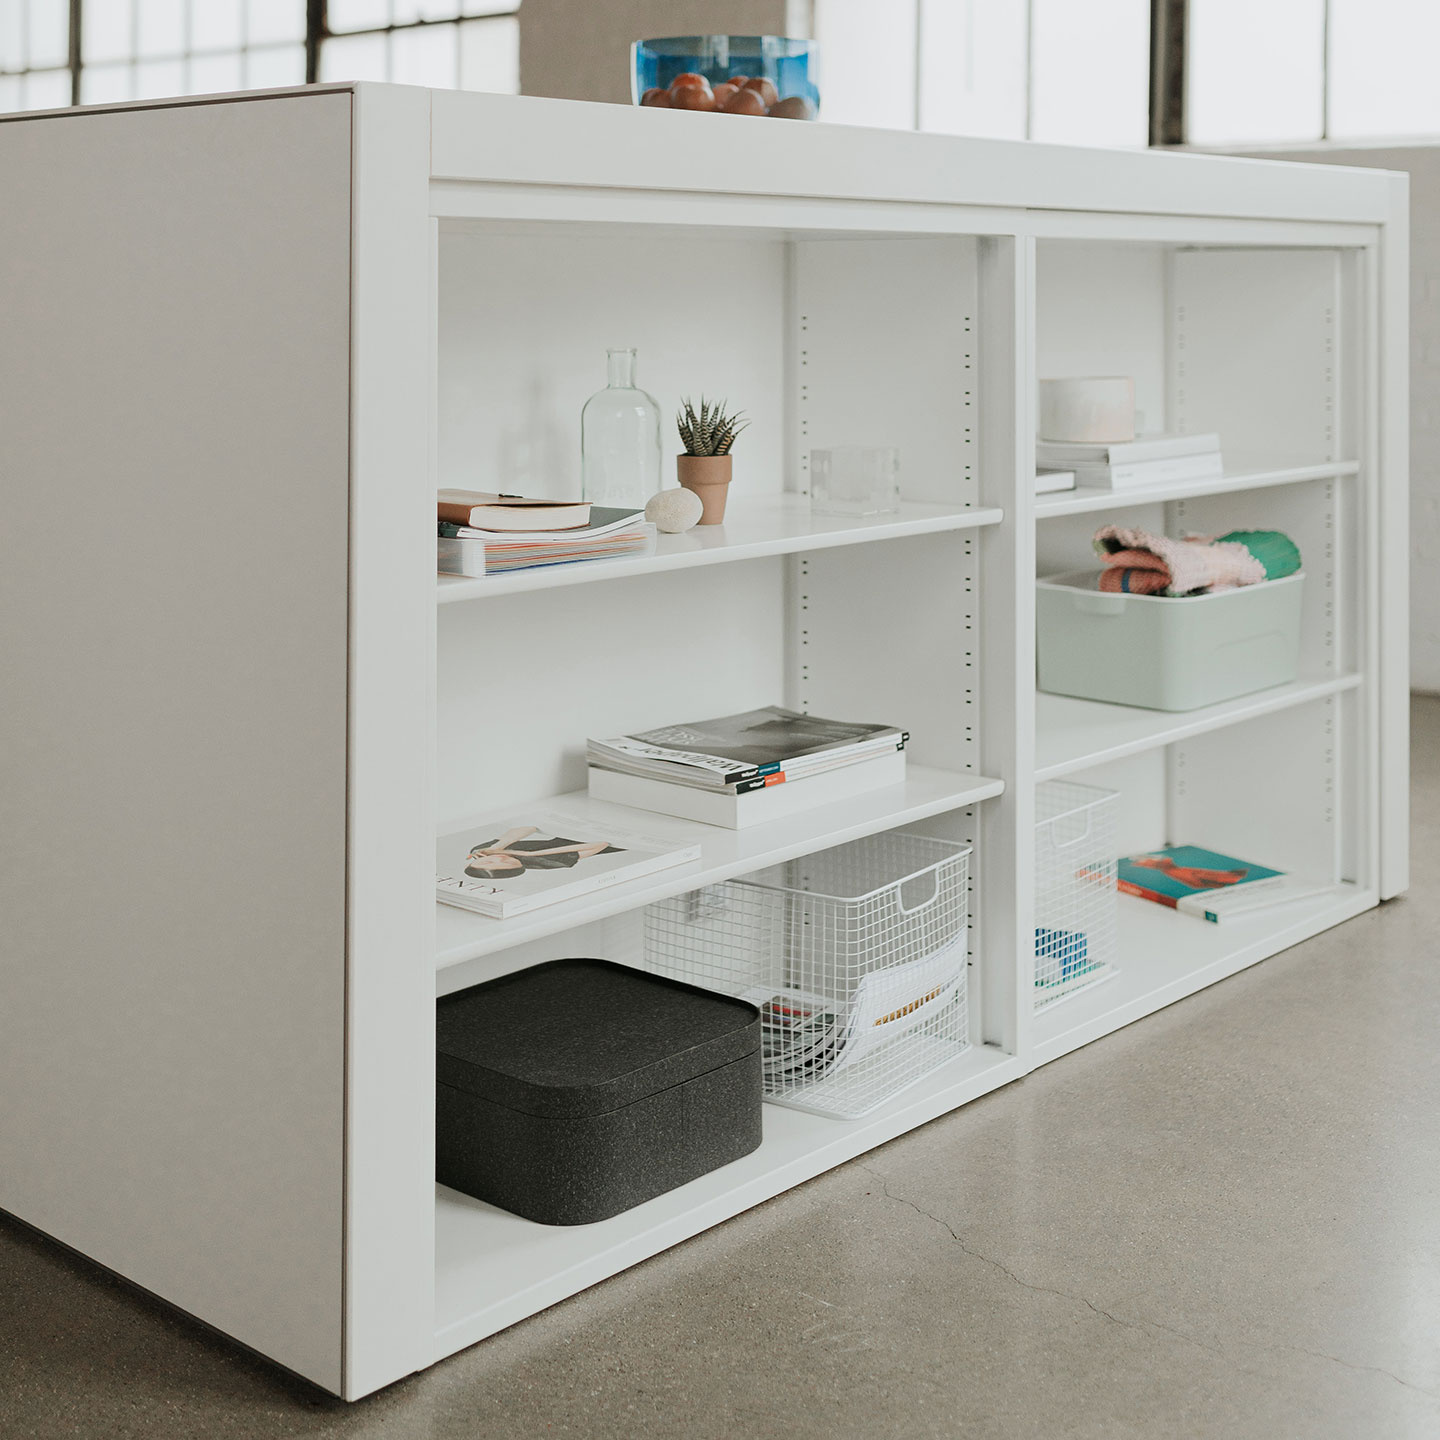 X Series bookcase with open shelves in white